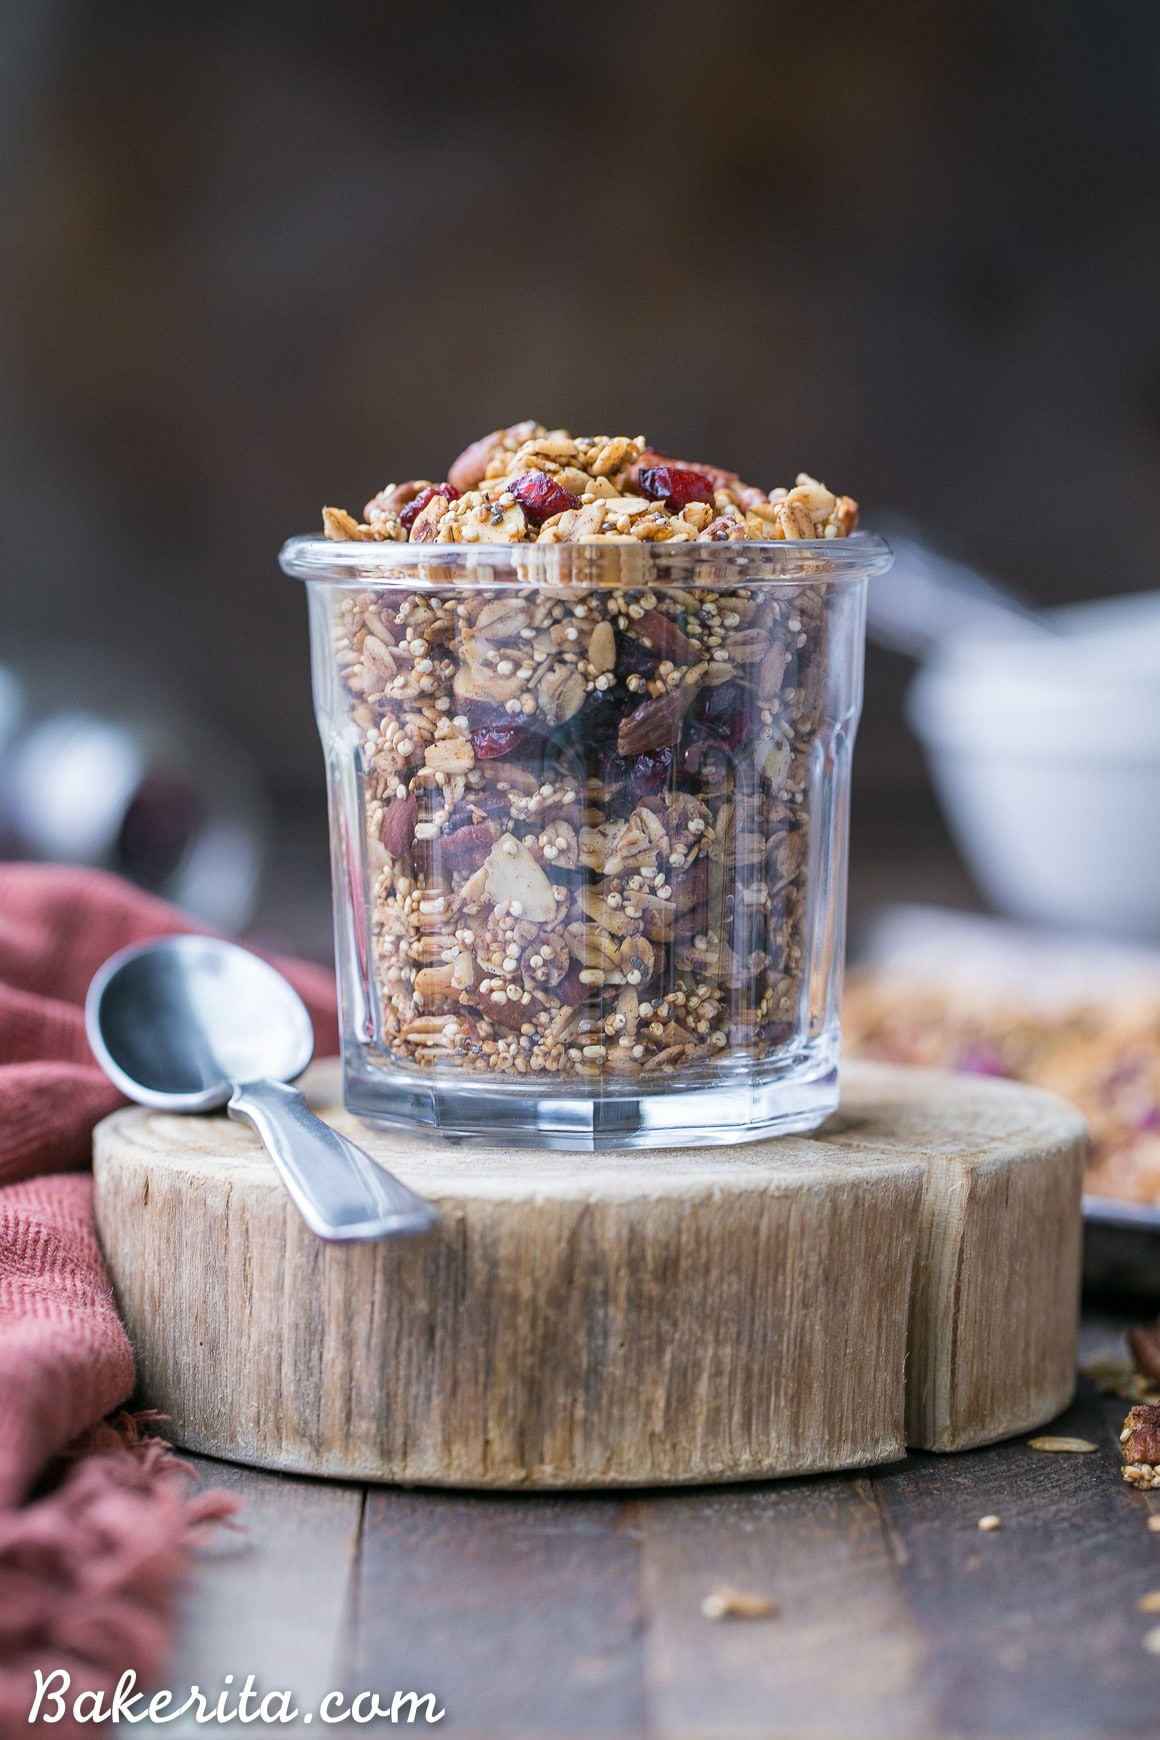 This Quinoa Granola is a nutty, crunchy breakfast or snack option that's packed with whole grains and protein. This maple-sweetened granola is gluten-free and vegan, with cinnamon and dried cranberries for flavor! The quinoa bakes up into delicious clusters.